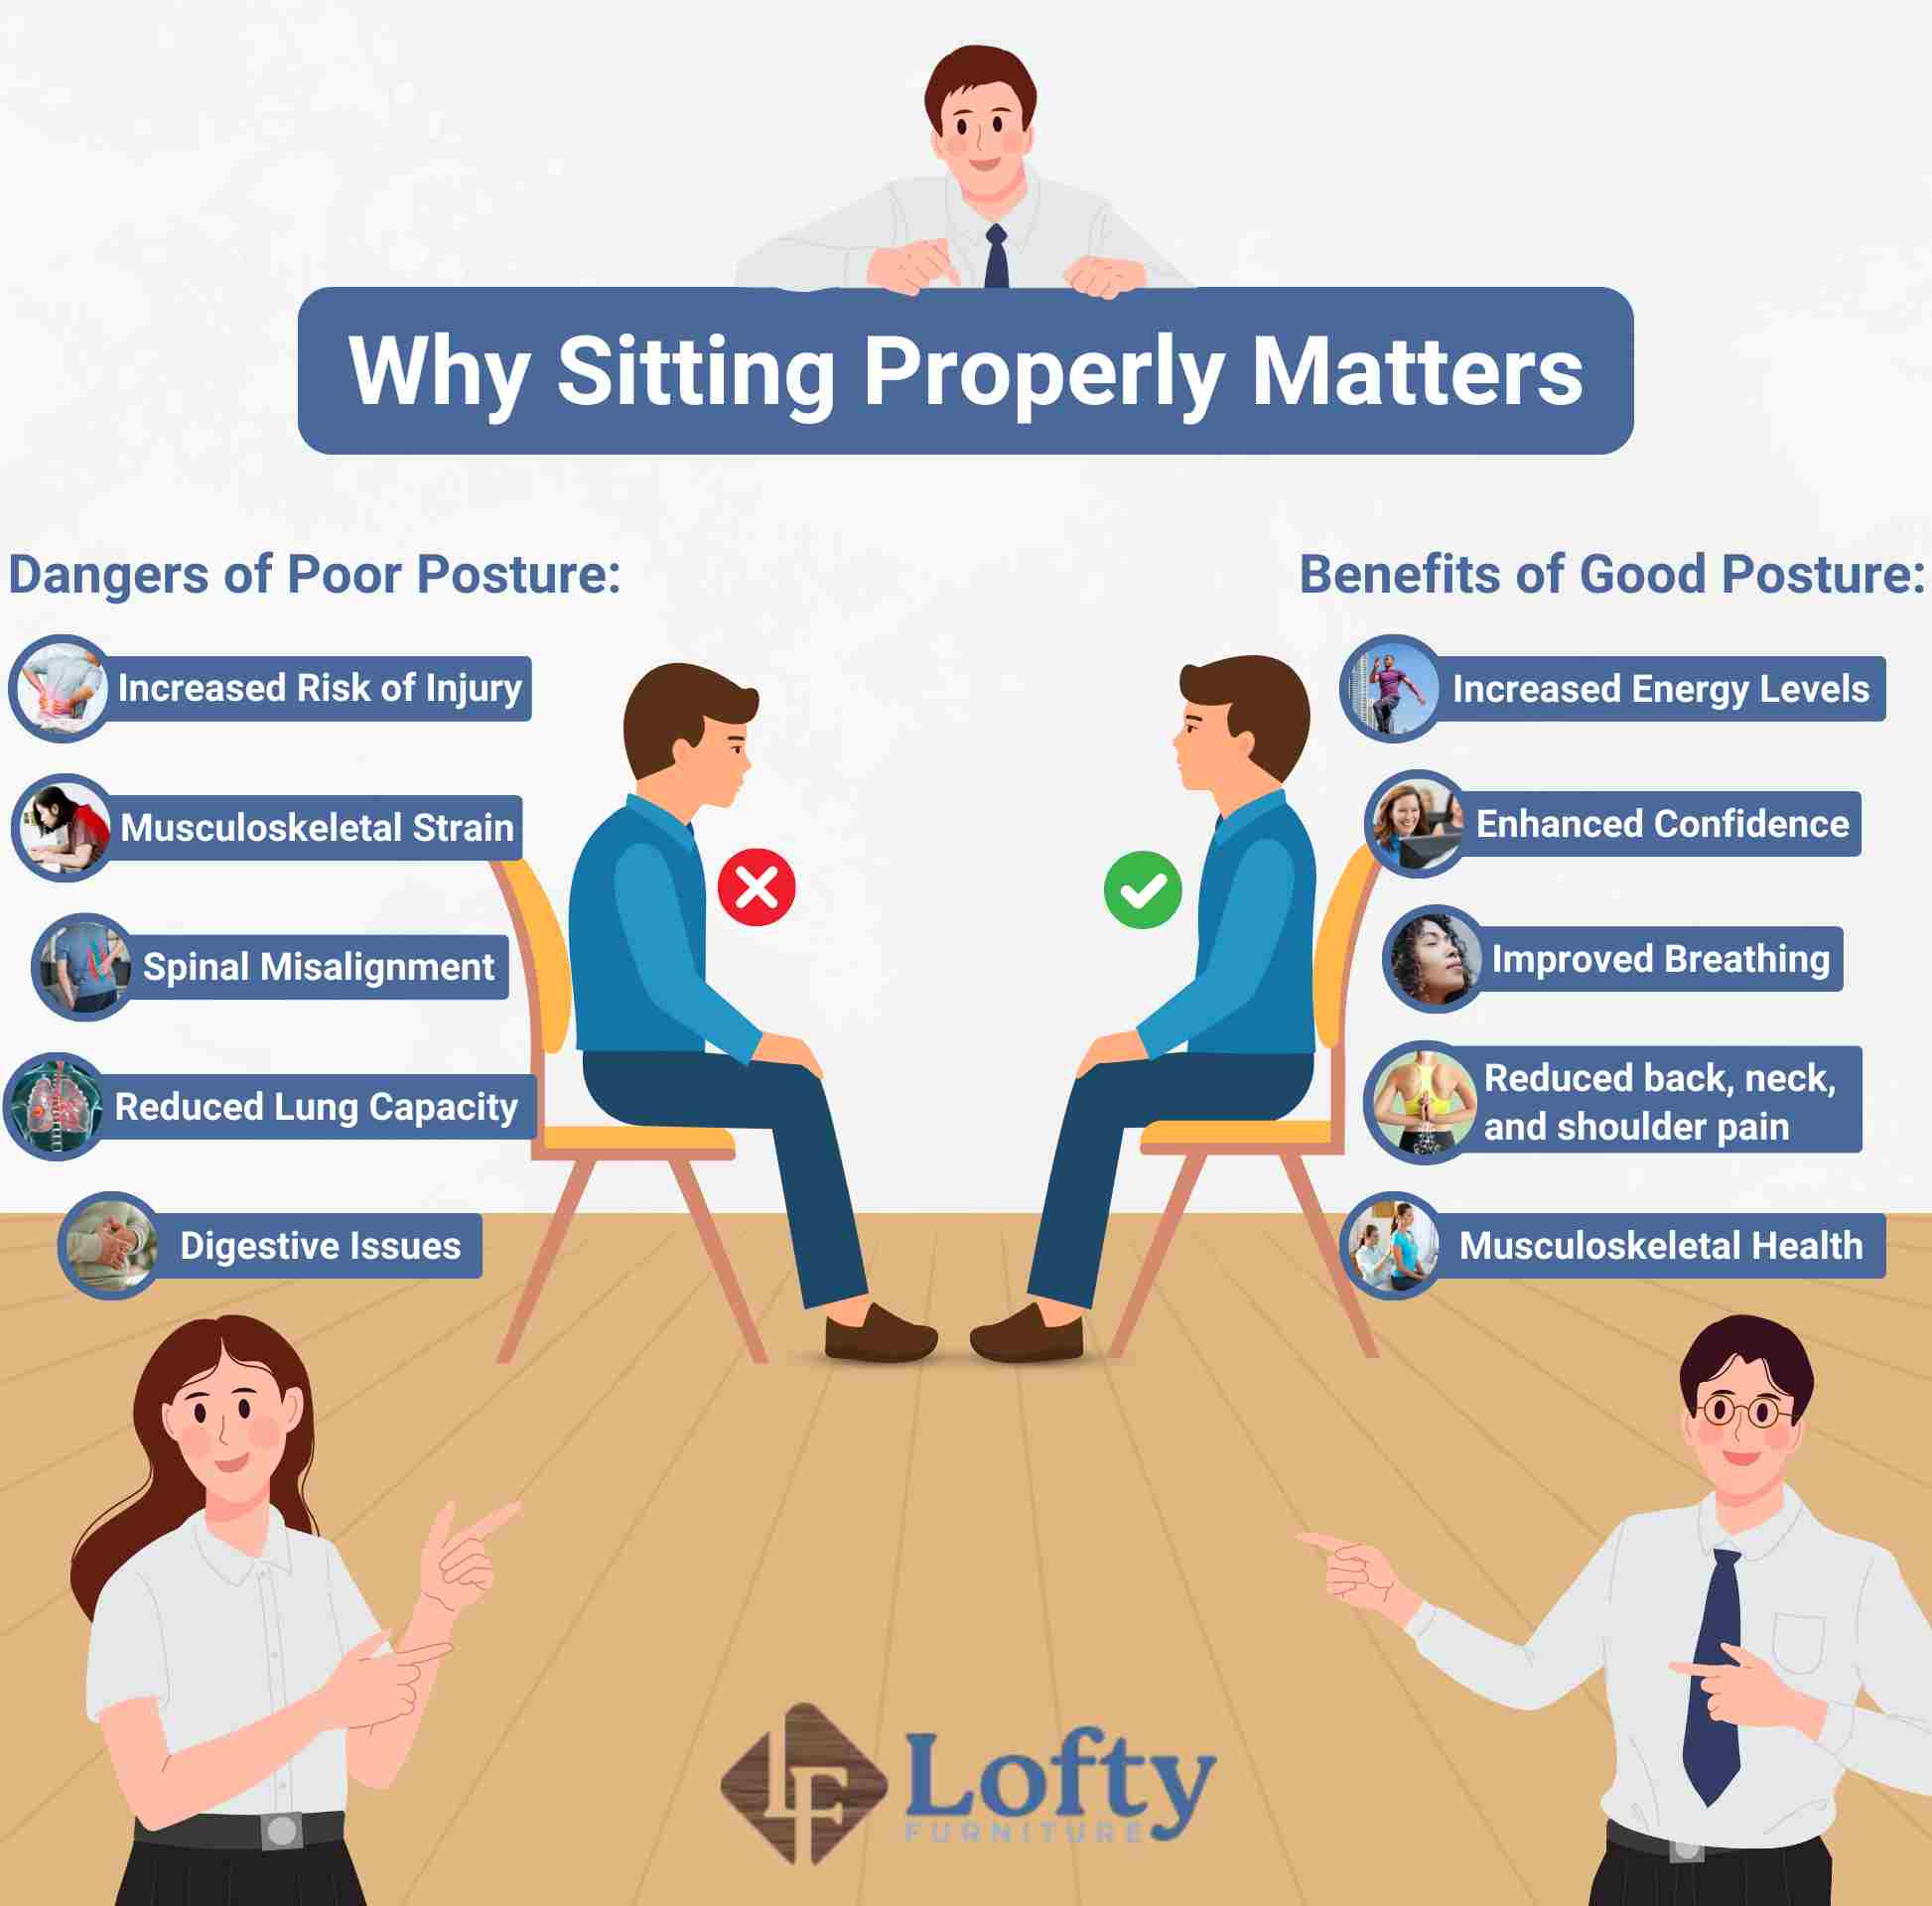 An illustration on why sitting properly matters.